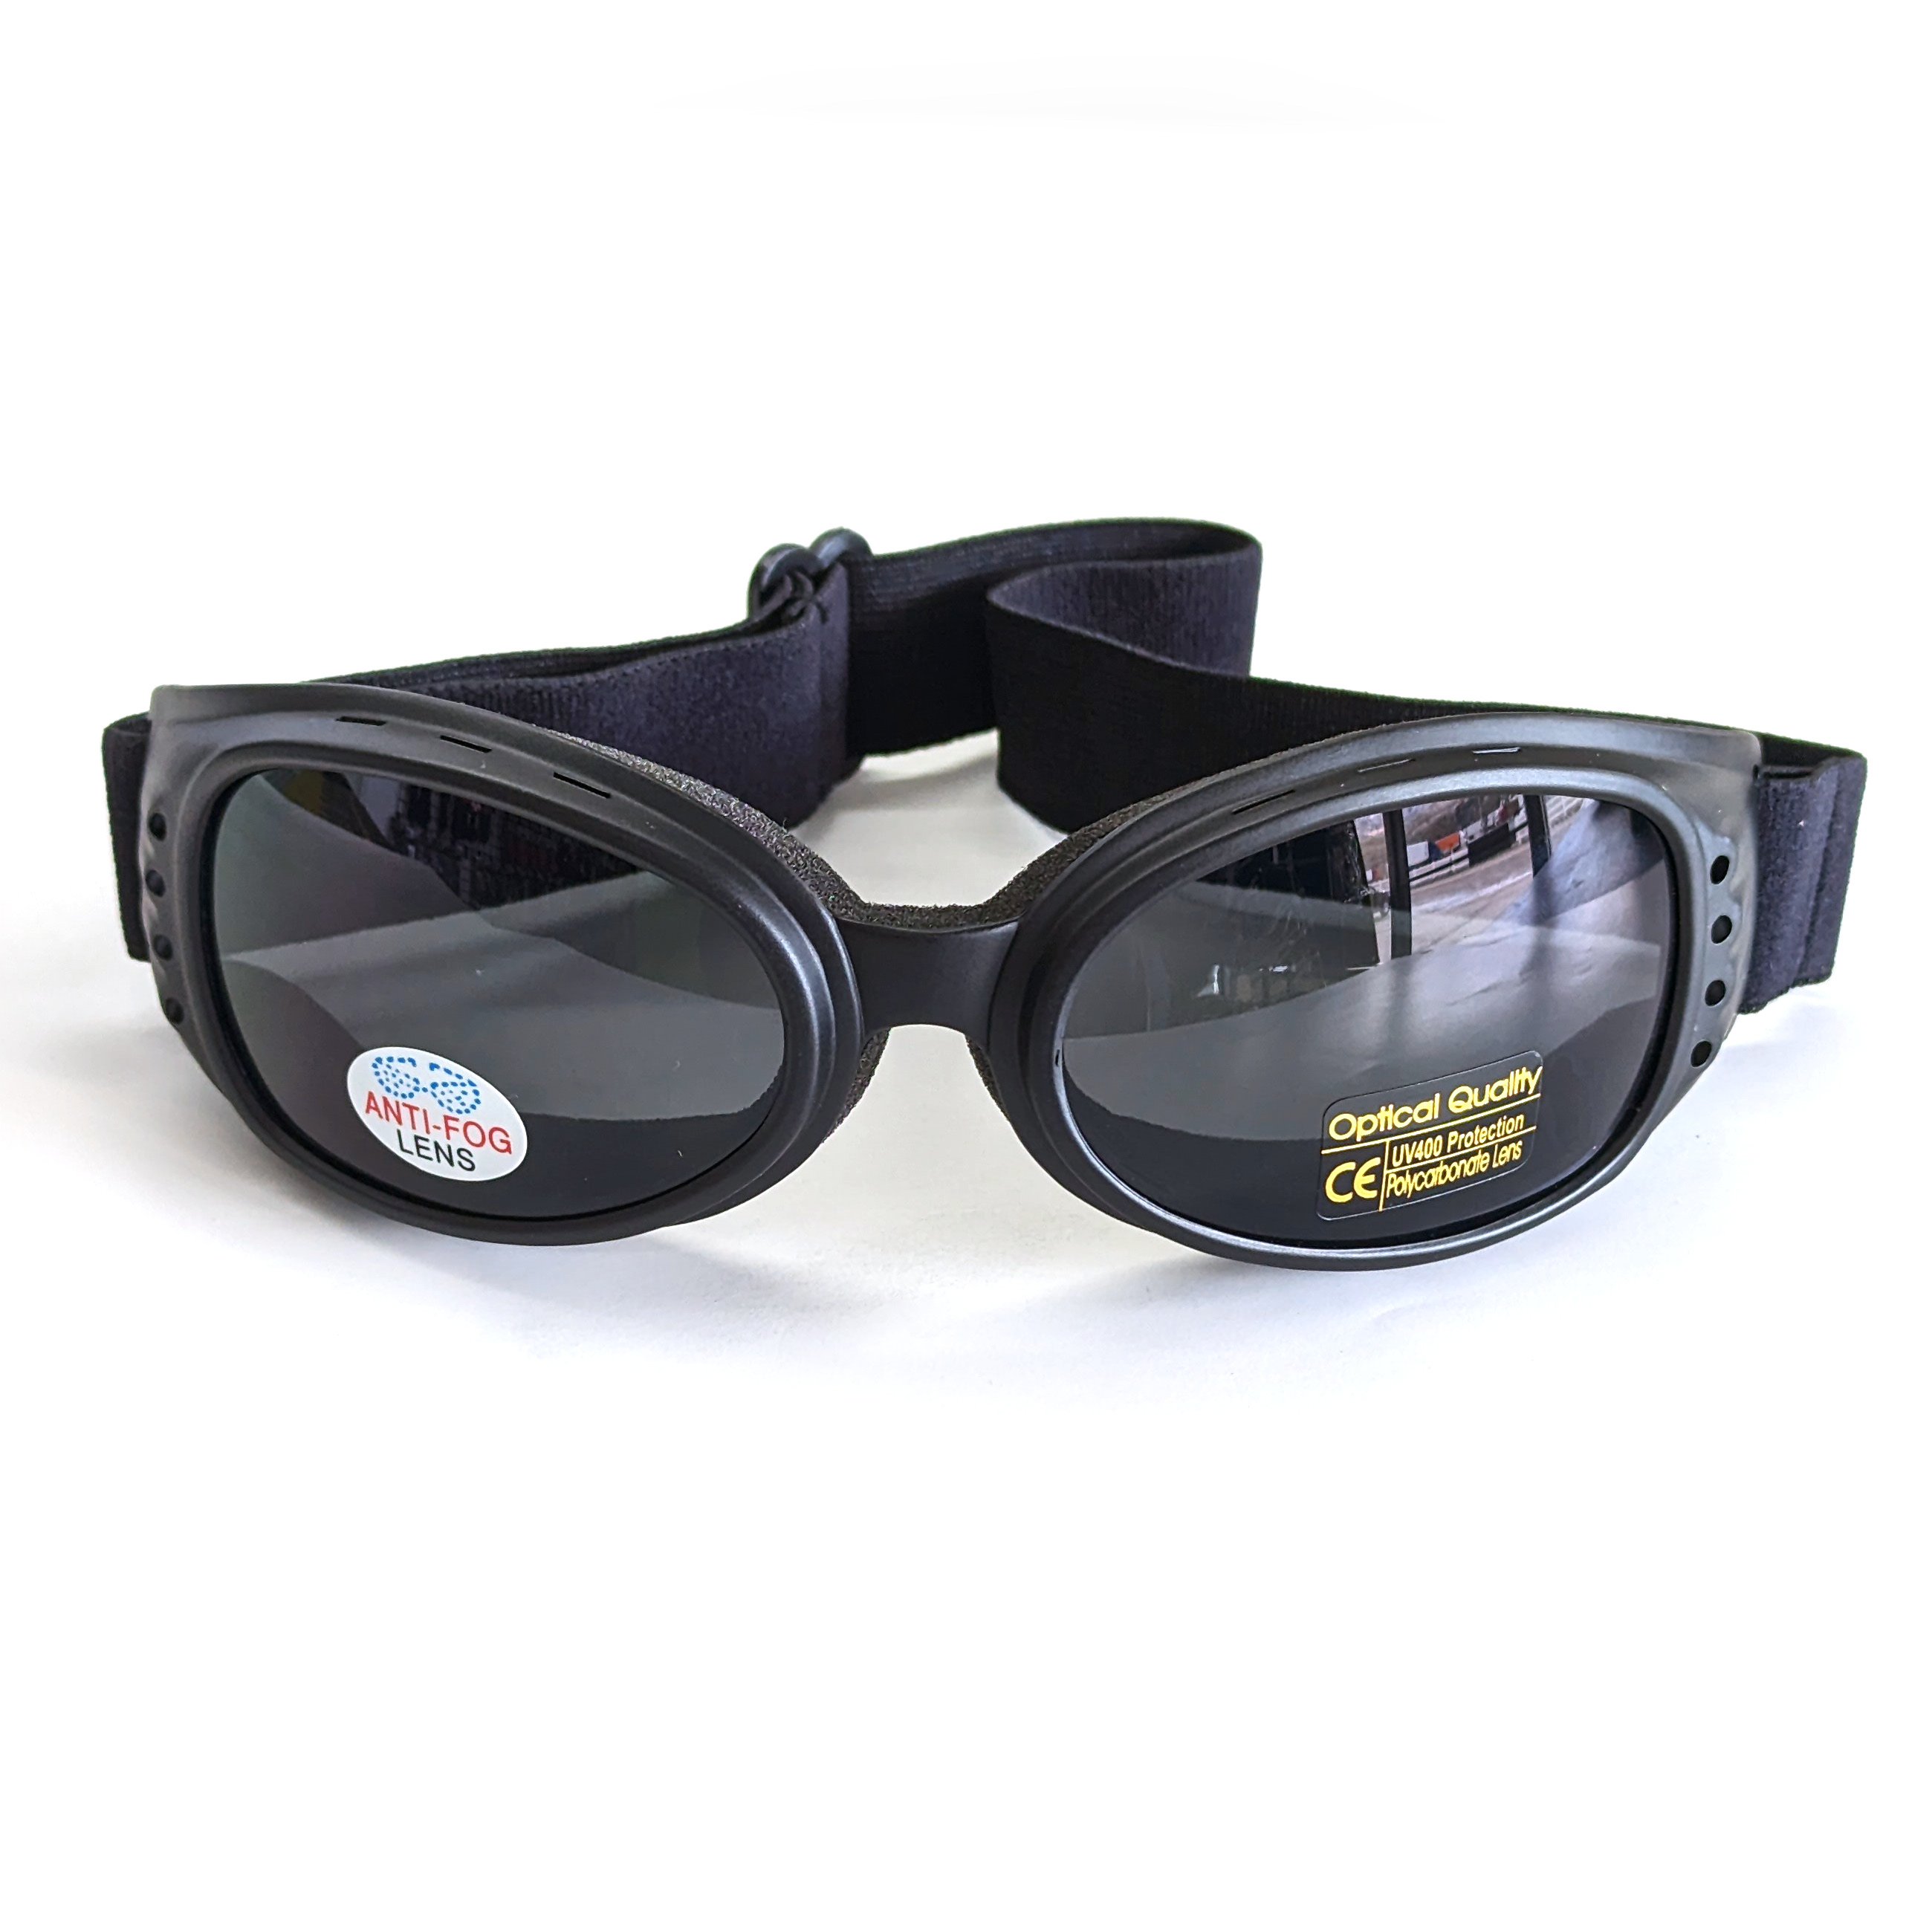 A10 Riding Goggles, Smoke Lens w/ Foam Padded & Vented Frame - Click Image to Close